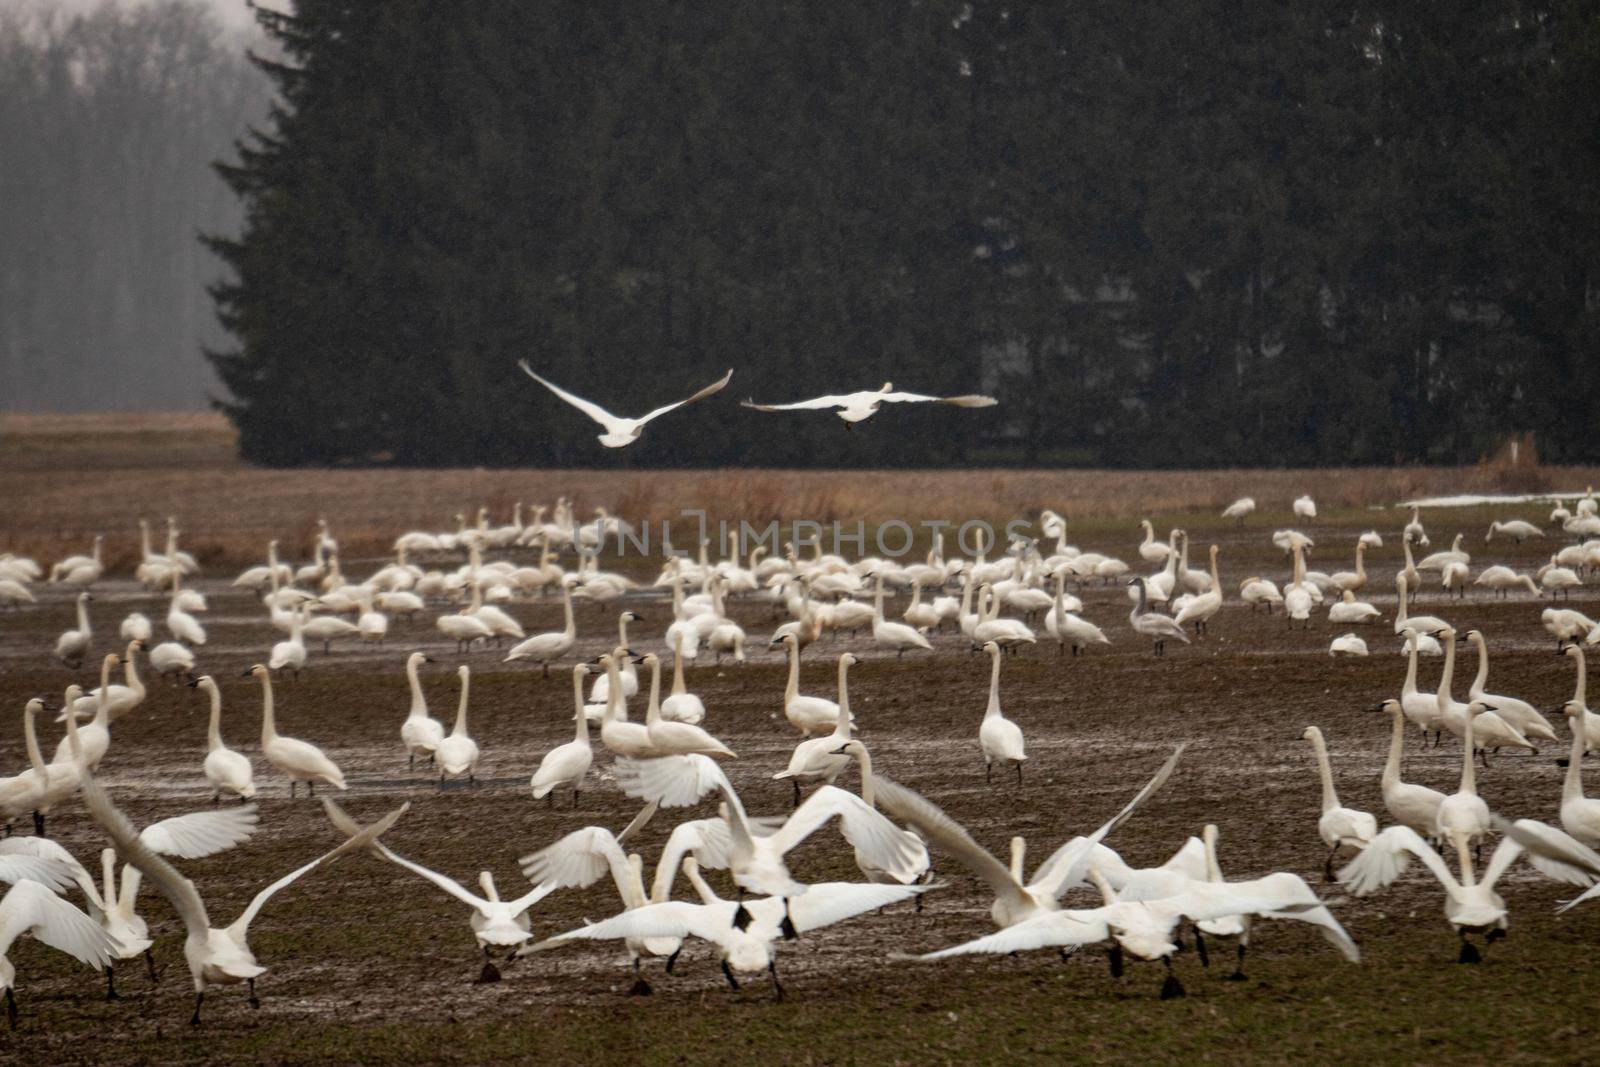 Tundra swans accumulating on a farmers field during winter migrations . High quality photo